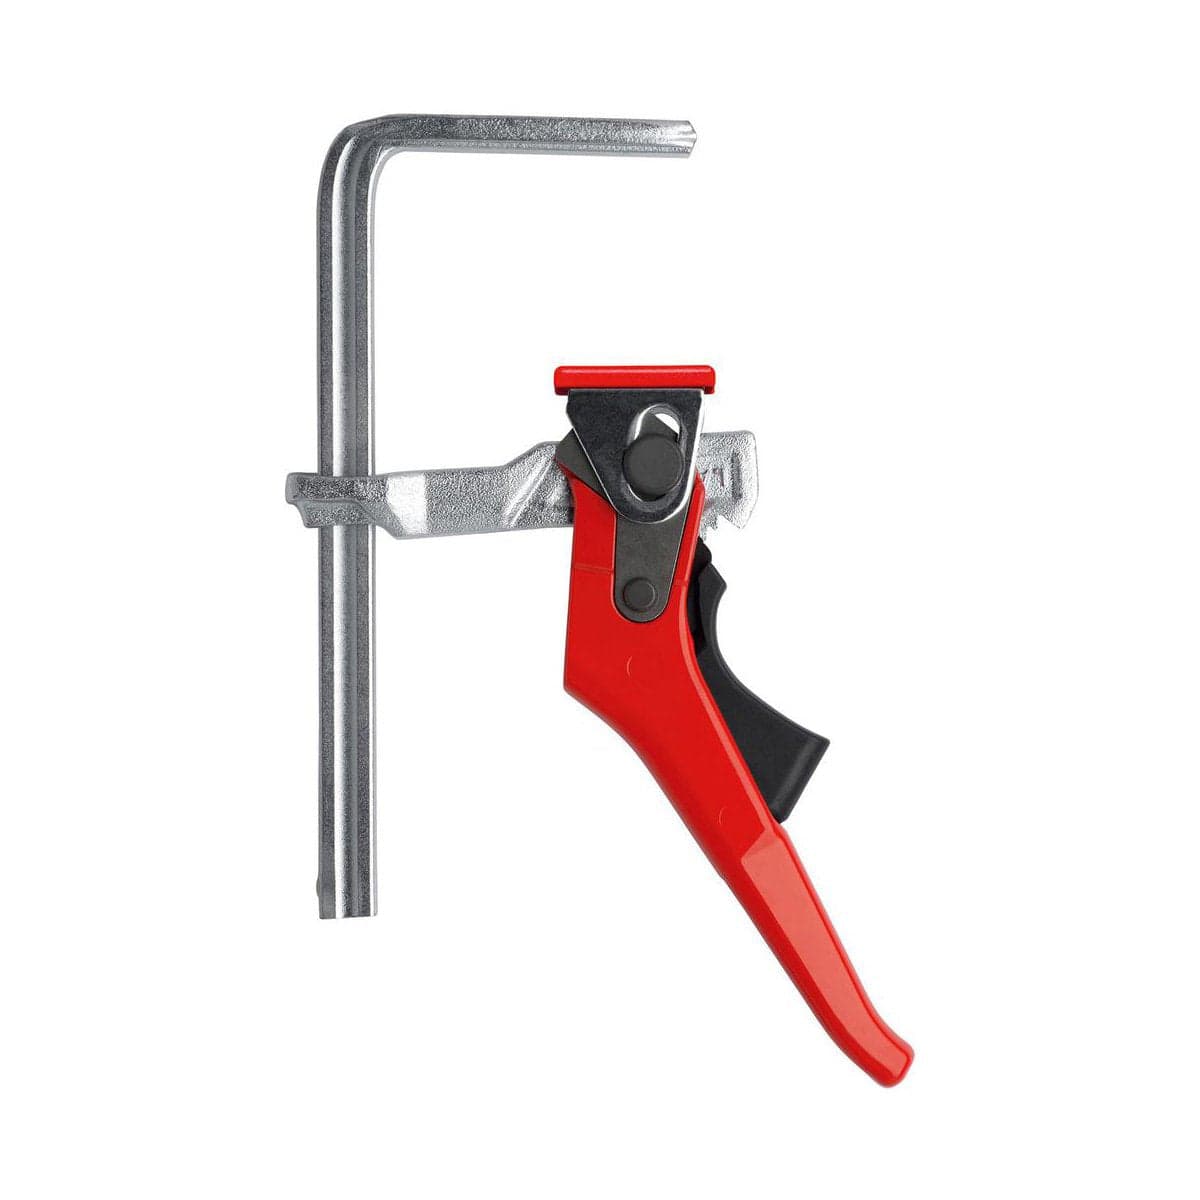 Bessey Tools GTR16S6H Clamp Guide Rail/Table - Lever Clamp